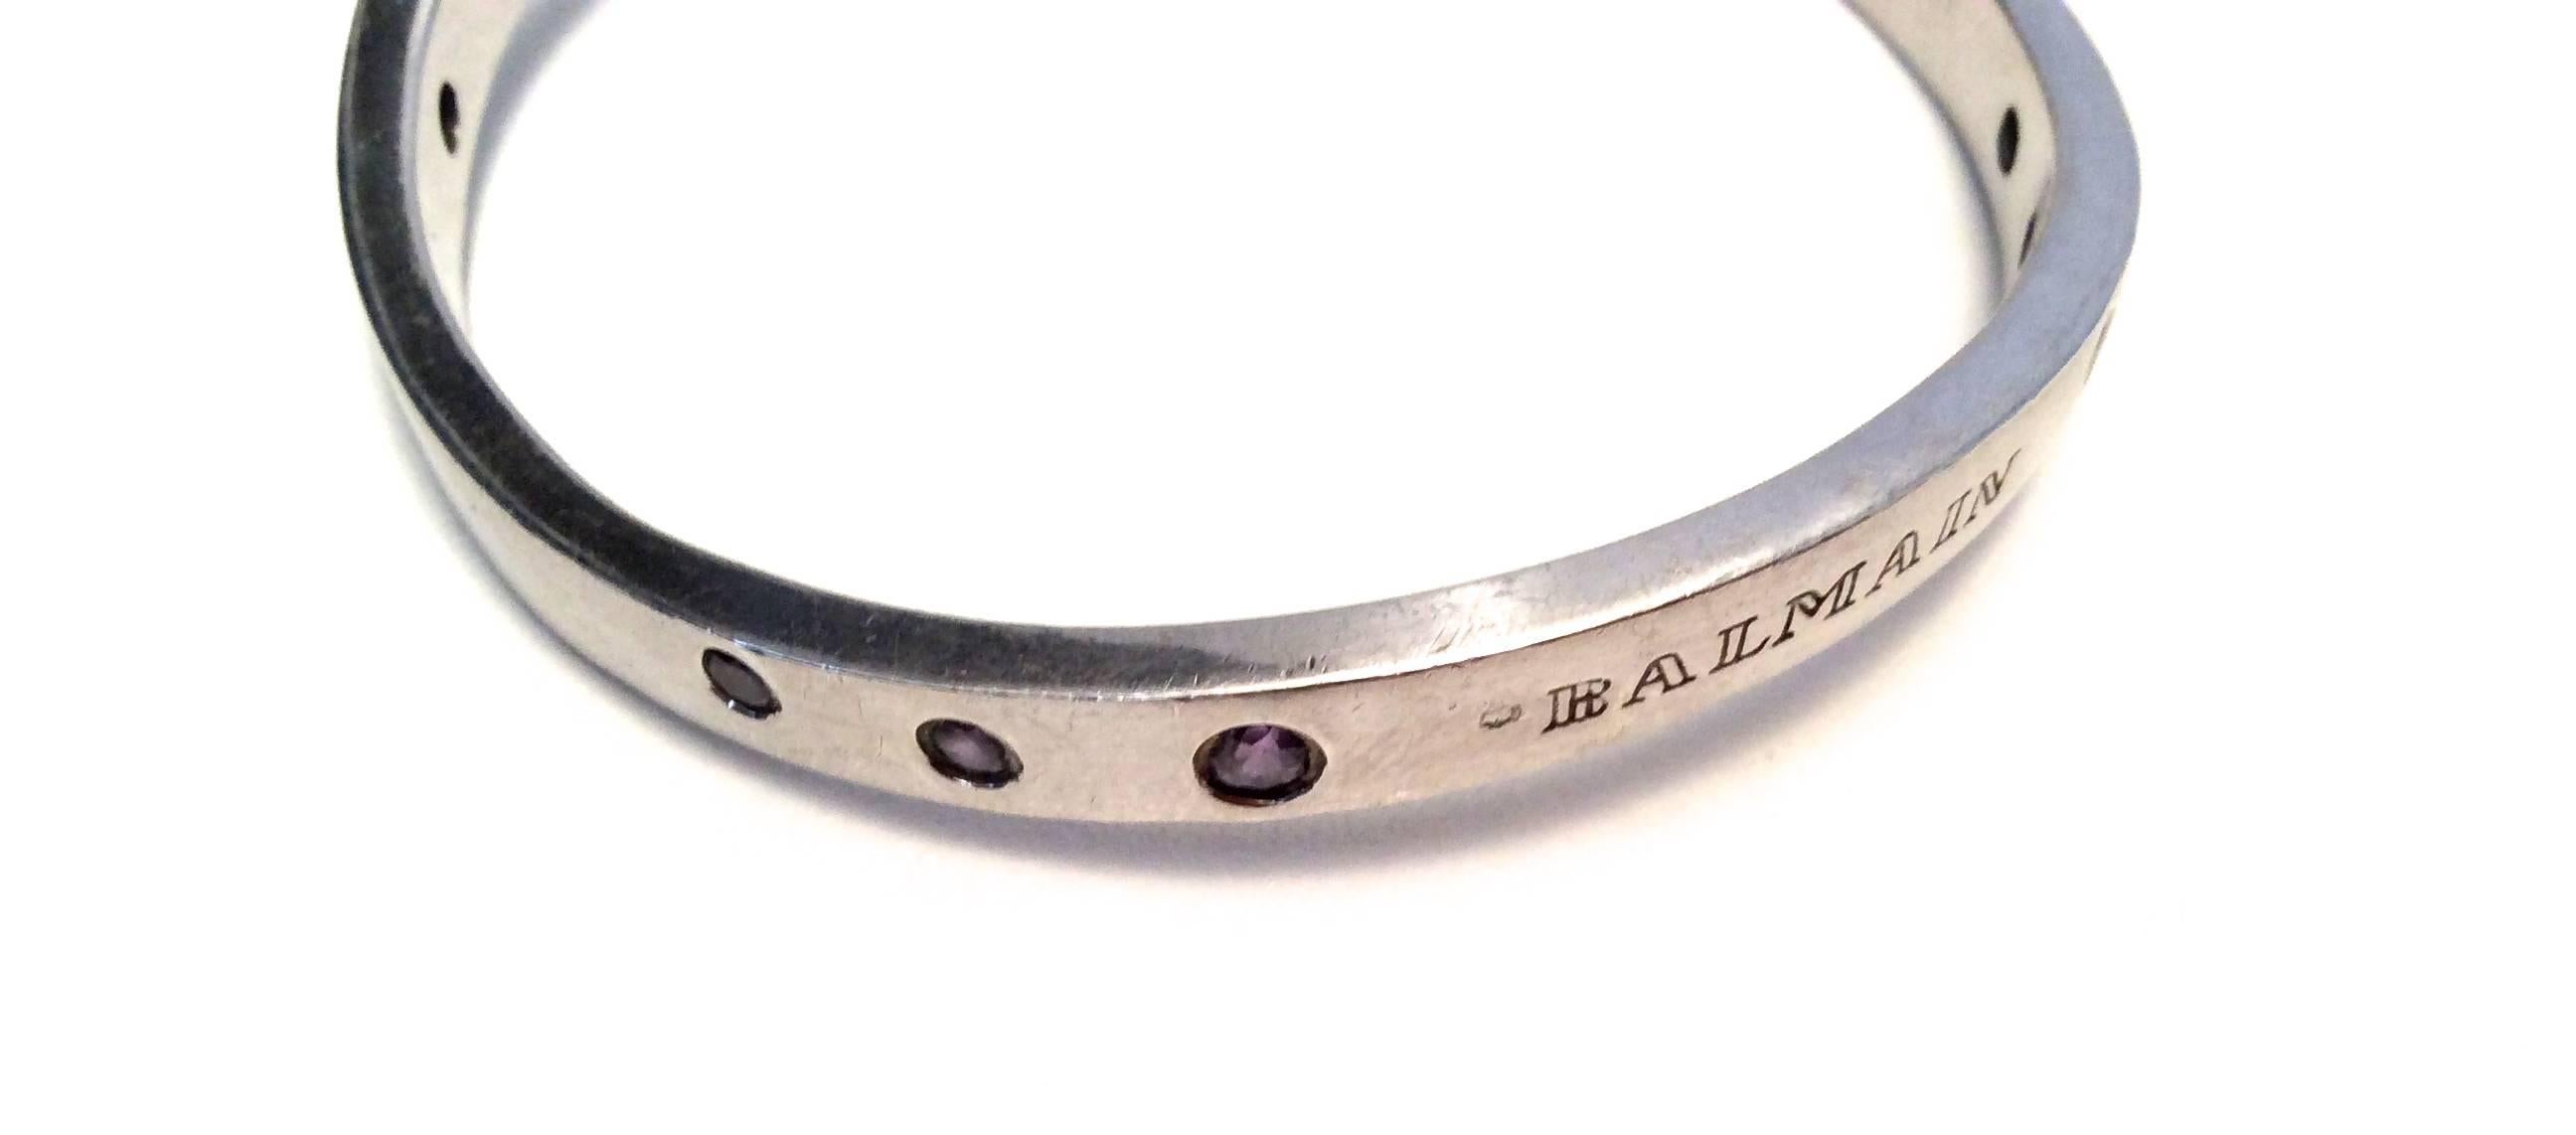 This beautiful Balmain sterling bracelet is solid sterling silver. It has a swerve to it in which it curves up on two sides and down on two sides. It is stamped .925 on the interior of the bracelet. Balmain is engraved on the exterior of the